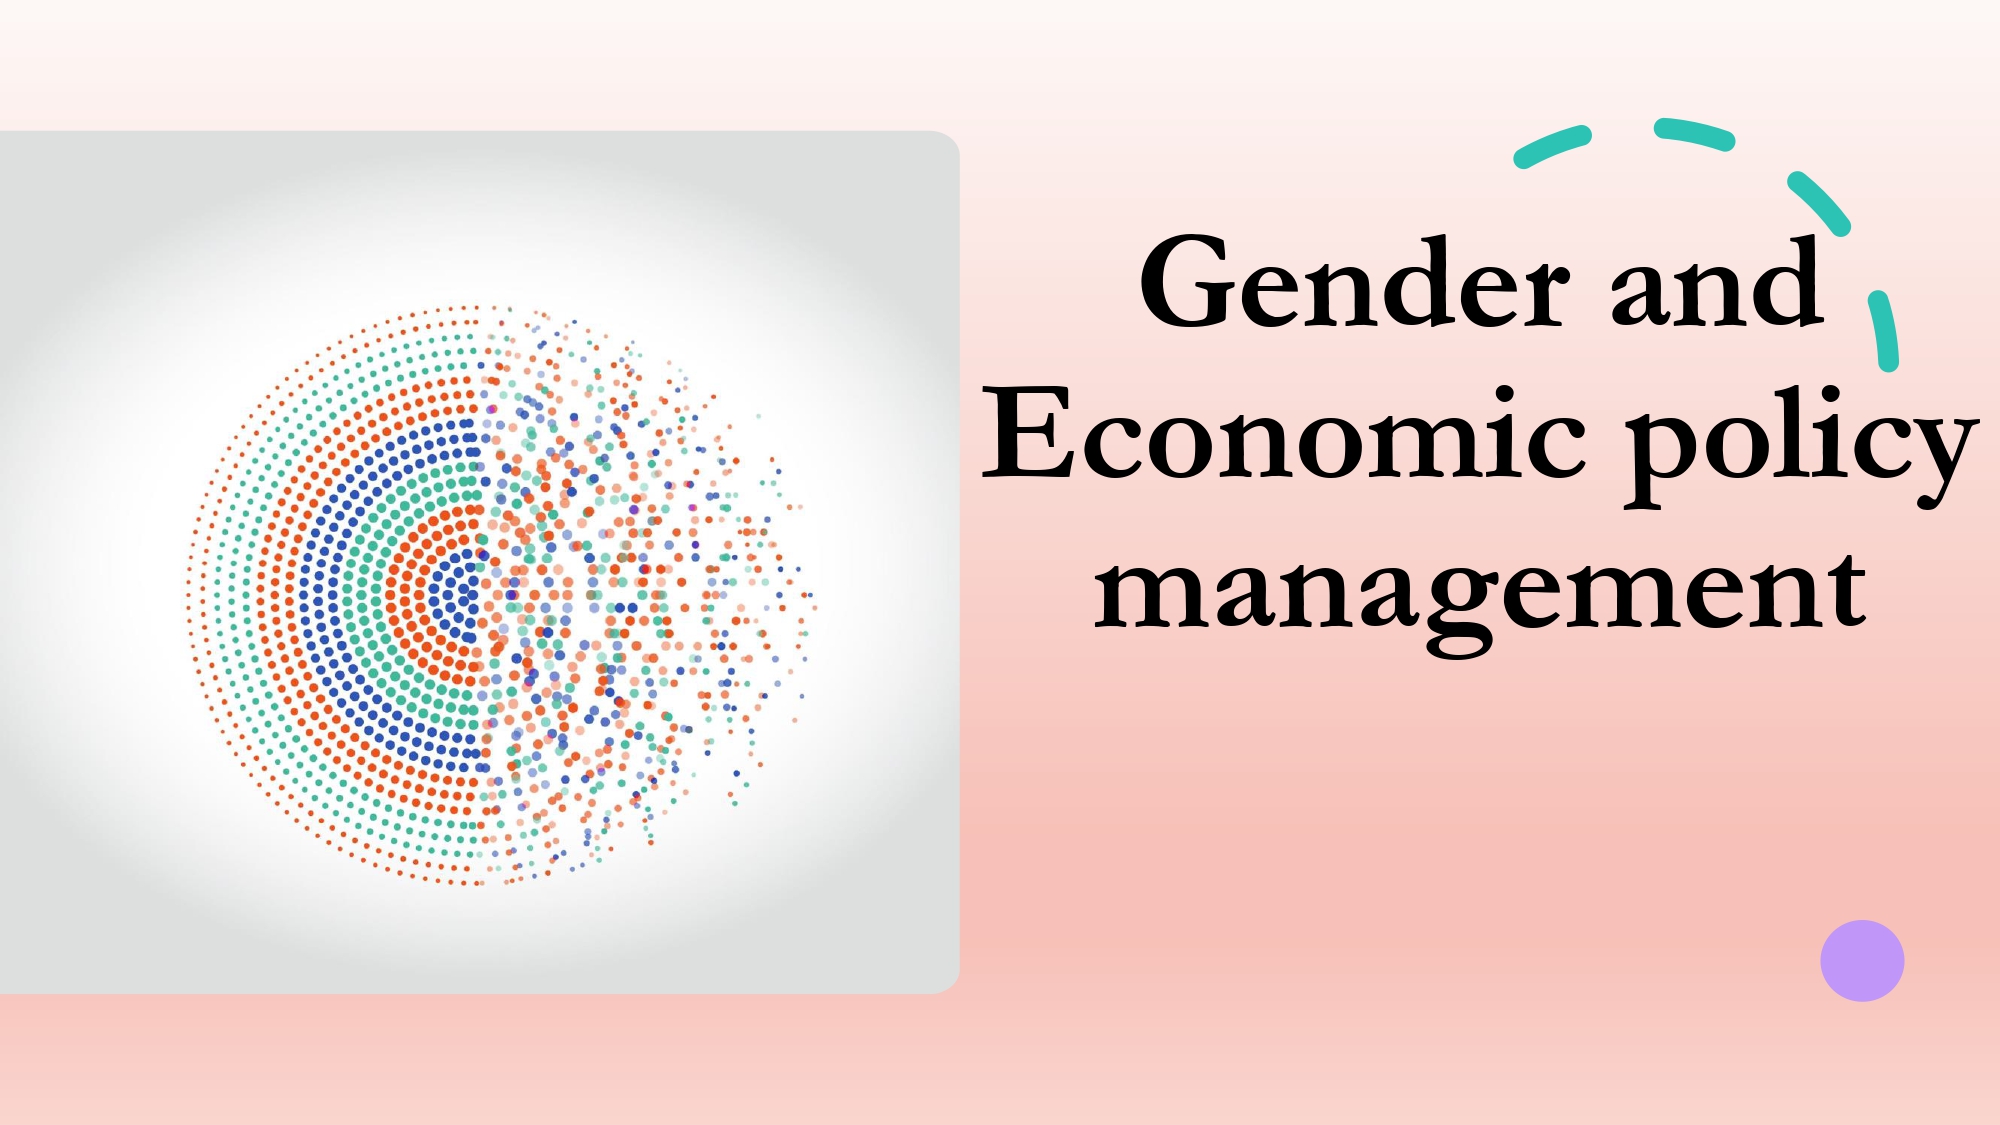 Gender and Economic policy management